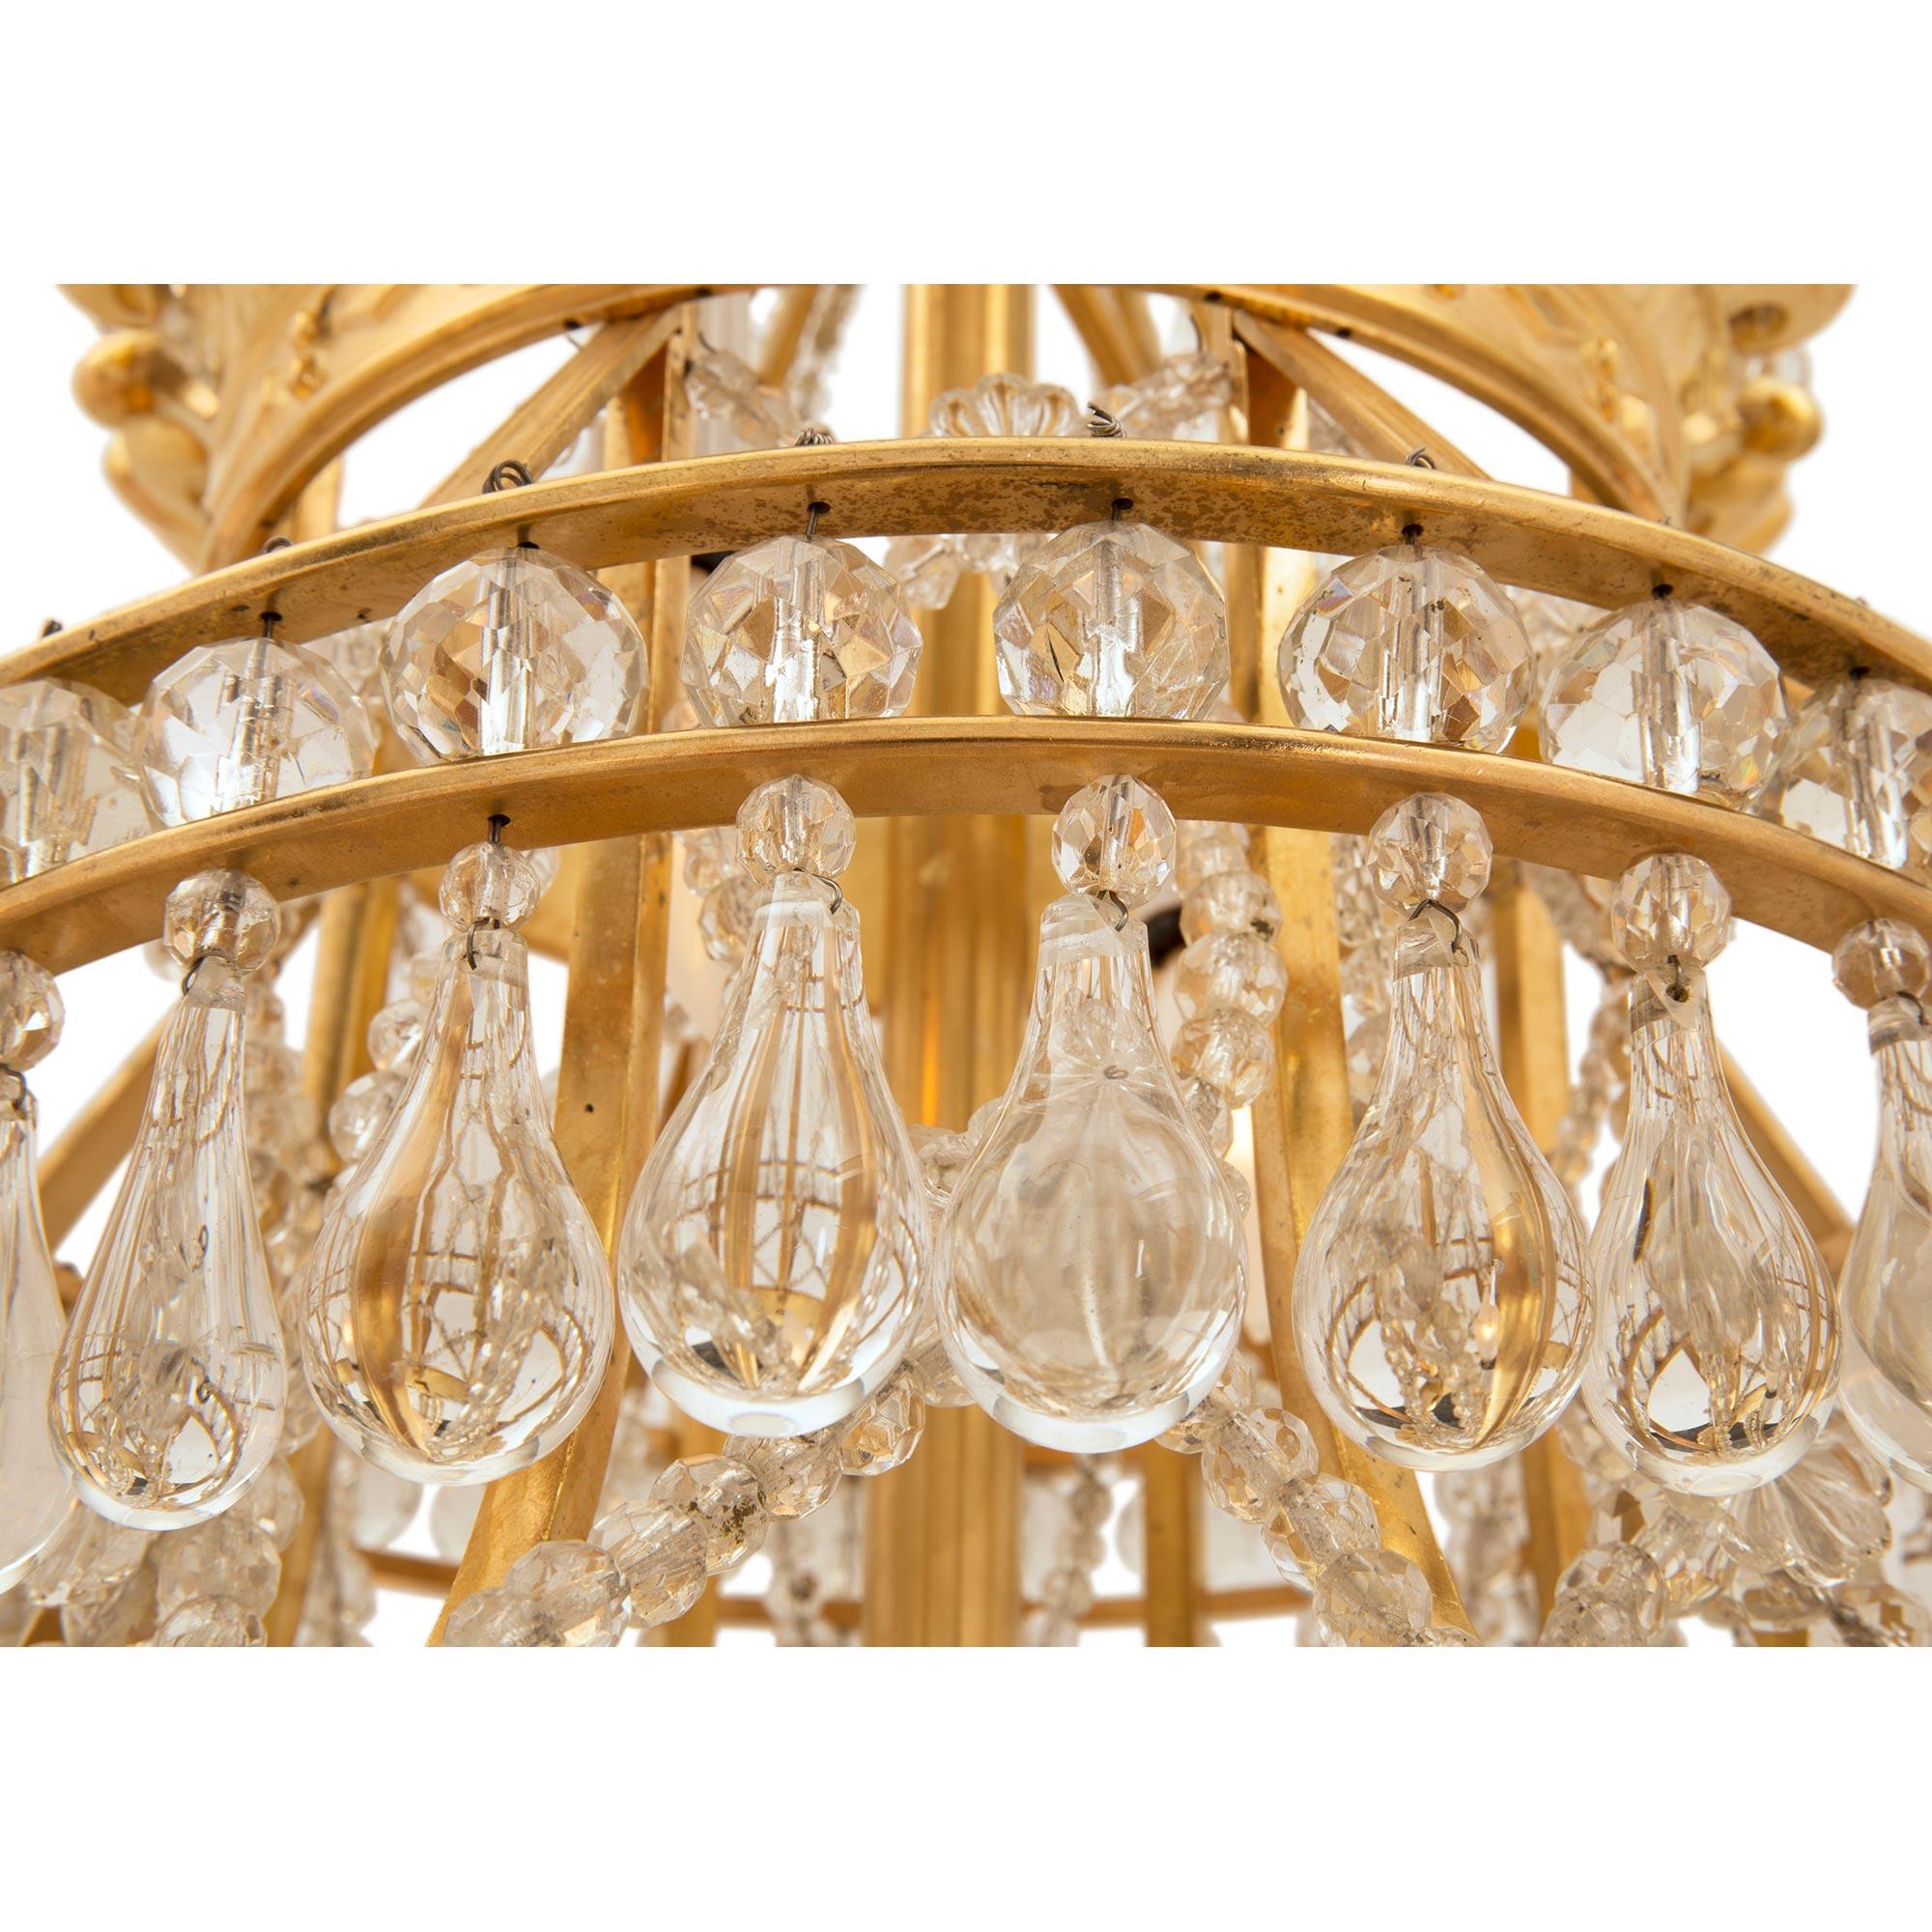 French 19th Century Louis XIV Style Ormolu, Crystal and Glass Royal Chandelier For Sale 3